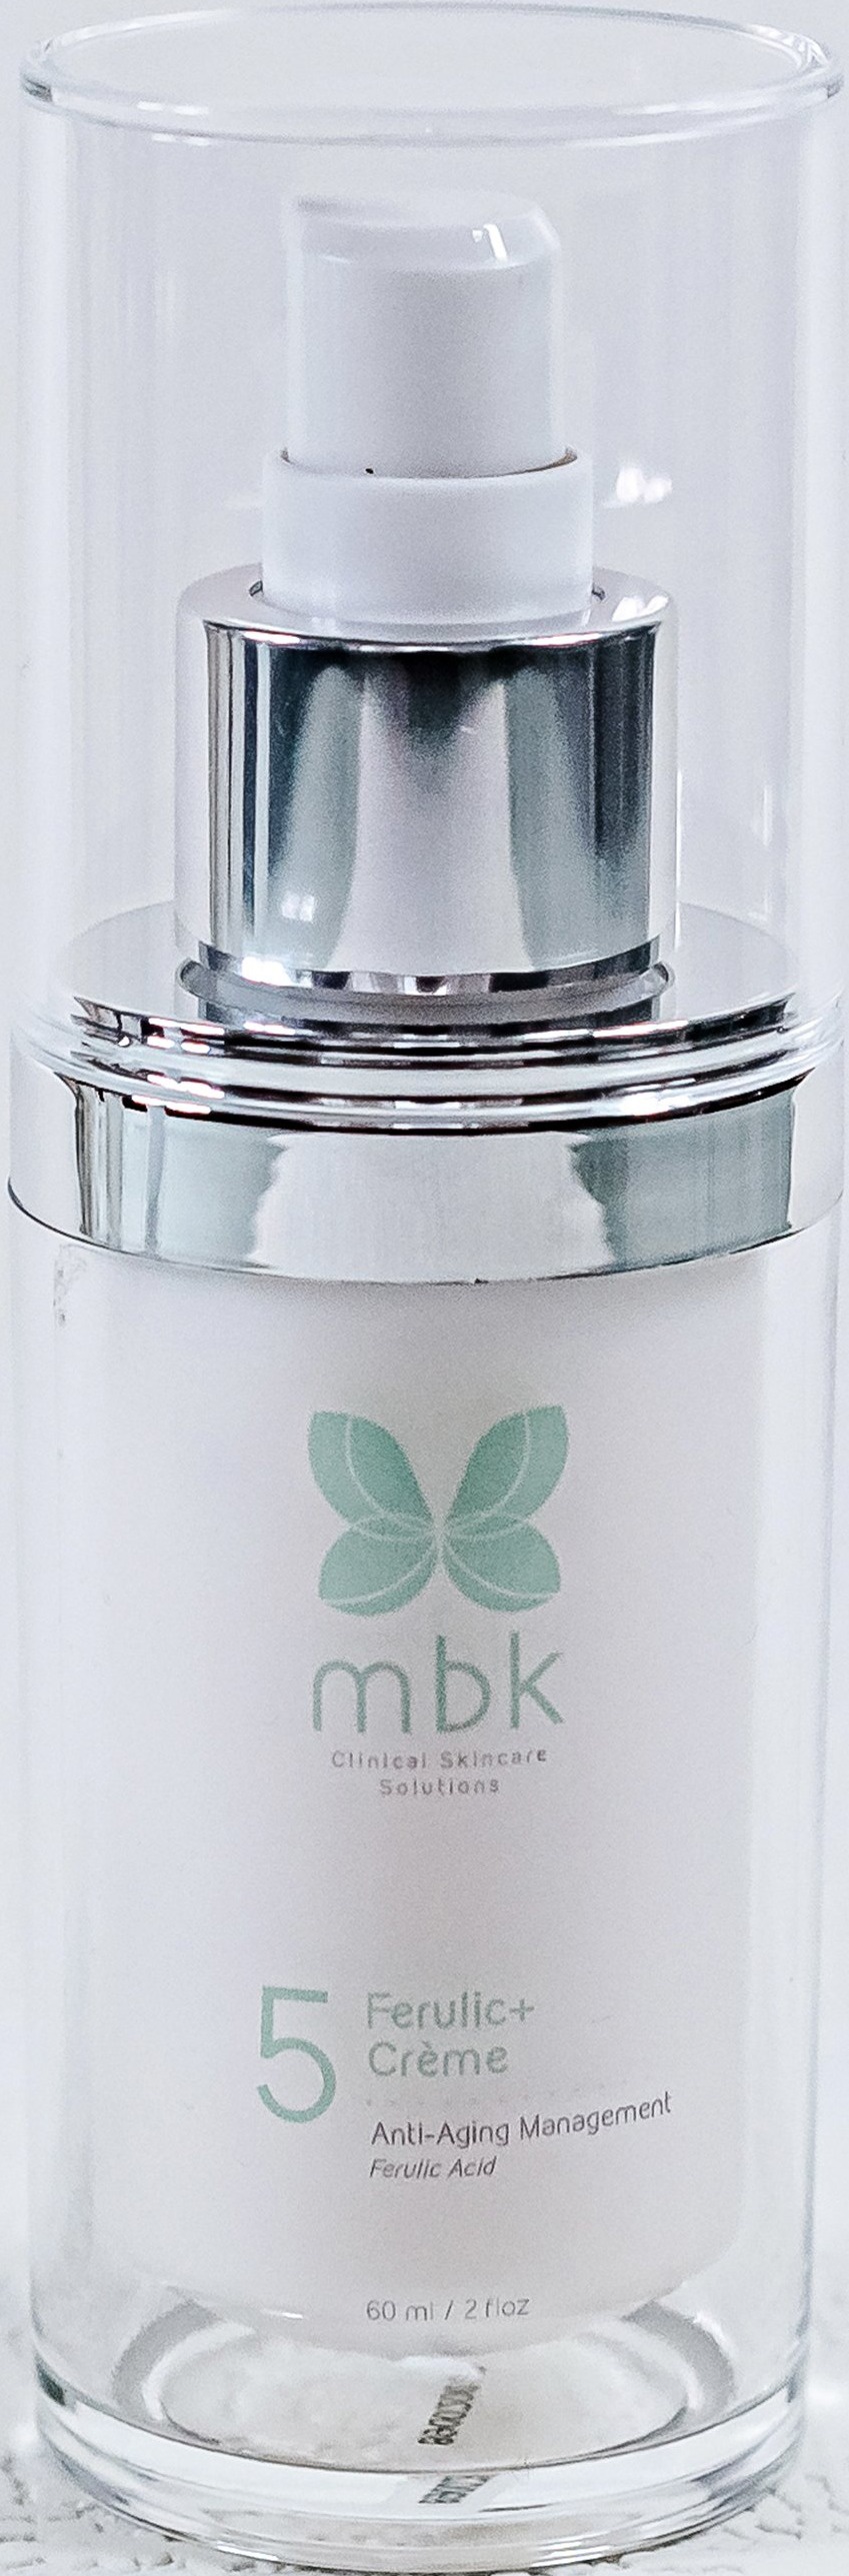 MBK Clinical Skincare Solutions Ferulic+ Creme